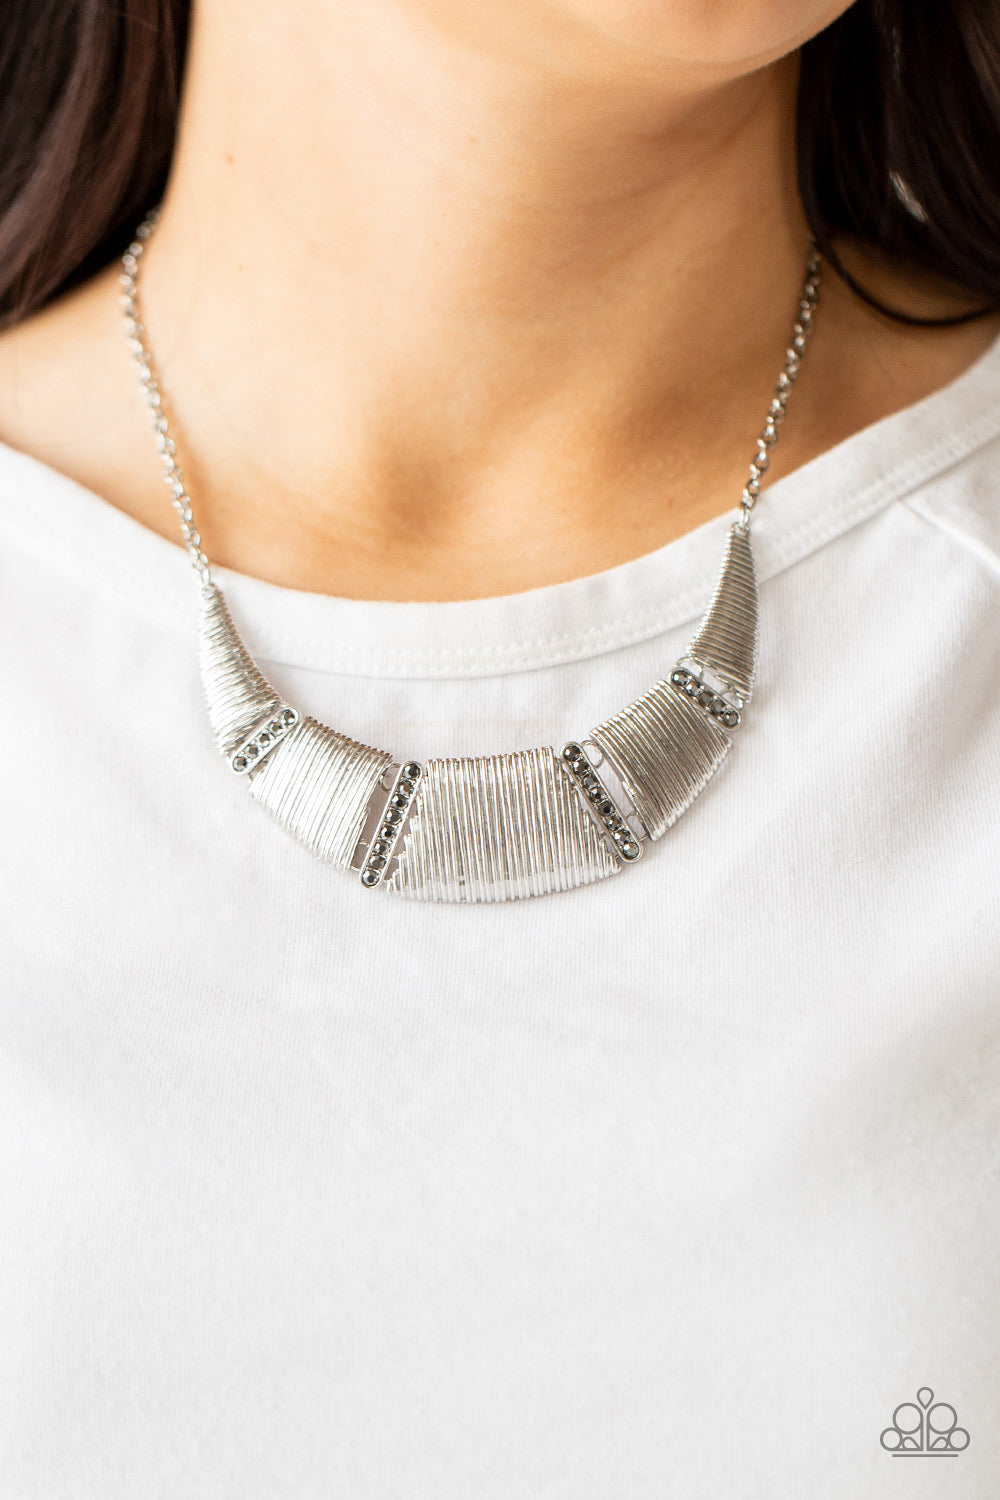 Embossed in linear textures, trapezoidal and triangular silver plates delicately link with dainty hematite rhinestone encrusted frames, creating a dramatic half moon below the collar. Features an adjustable clasp closure.